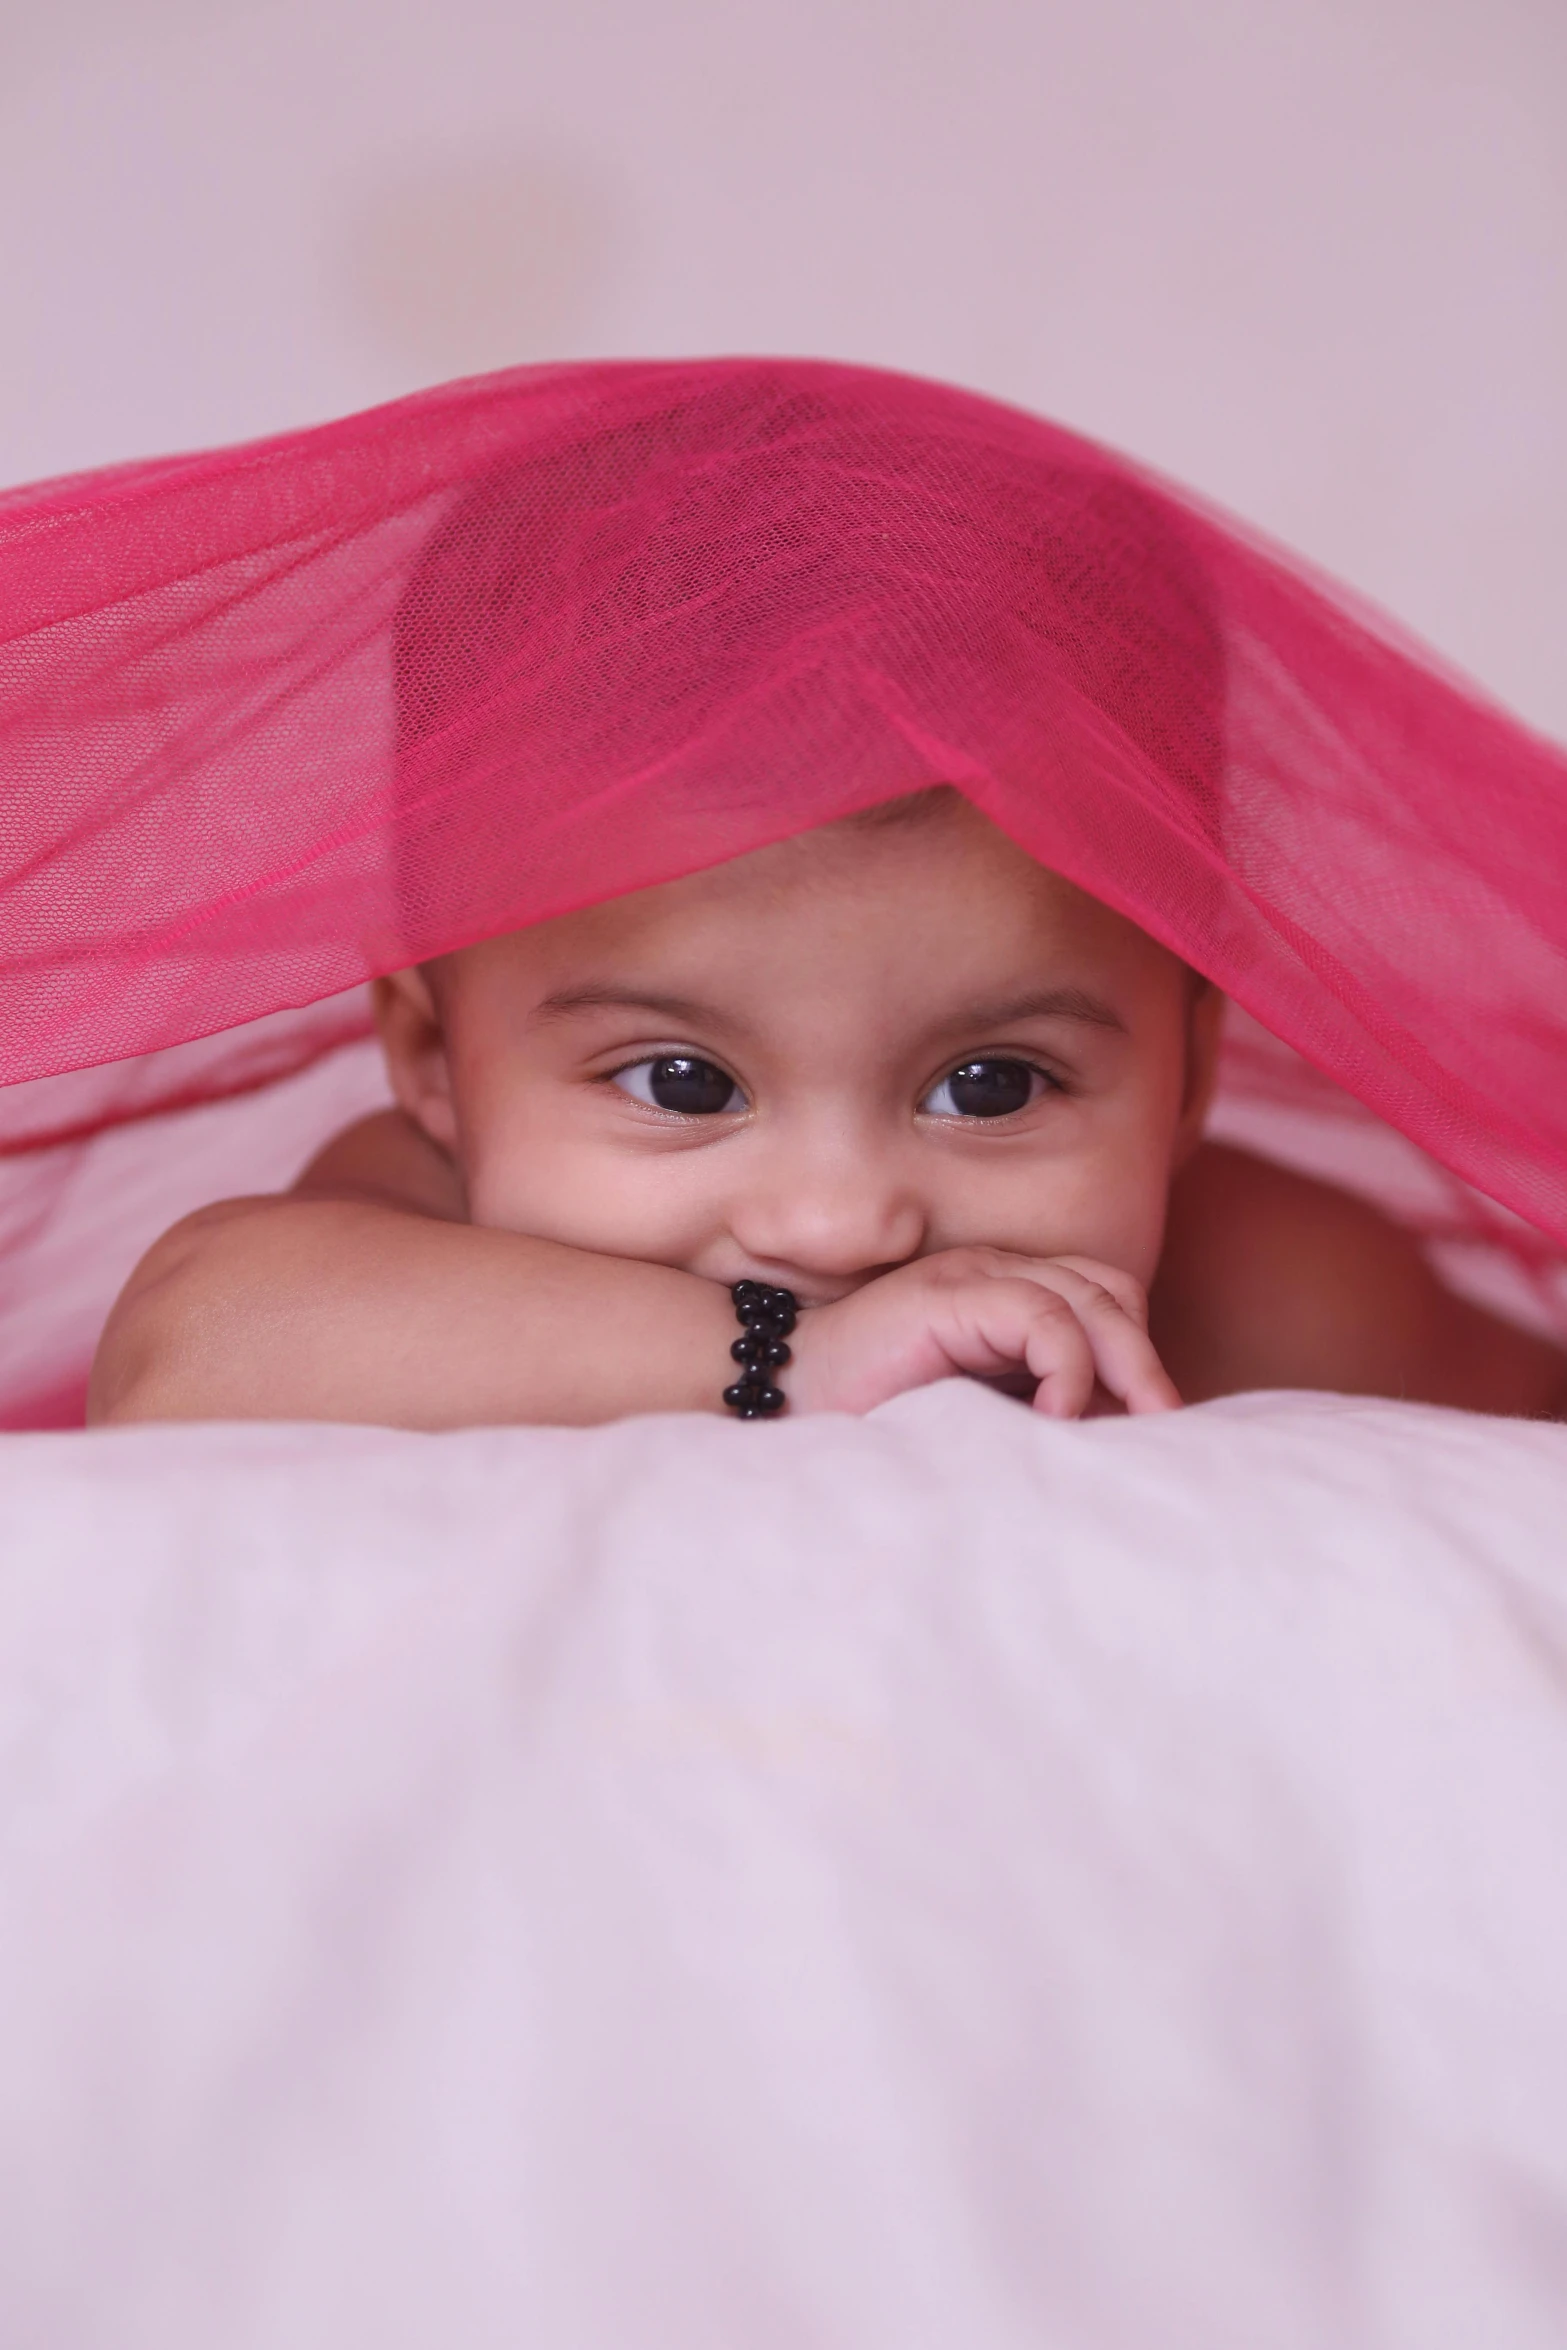 a baby laying on top of a bed under a pink sheet, shutterstock contest winner, art photography, turban, pink and black, indian, looking menacing